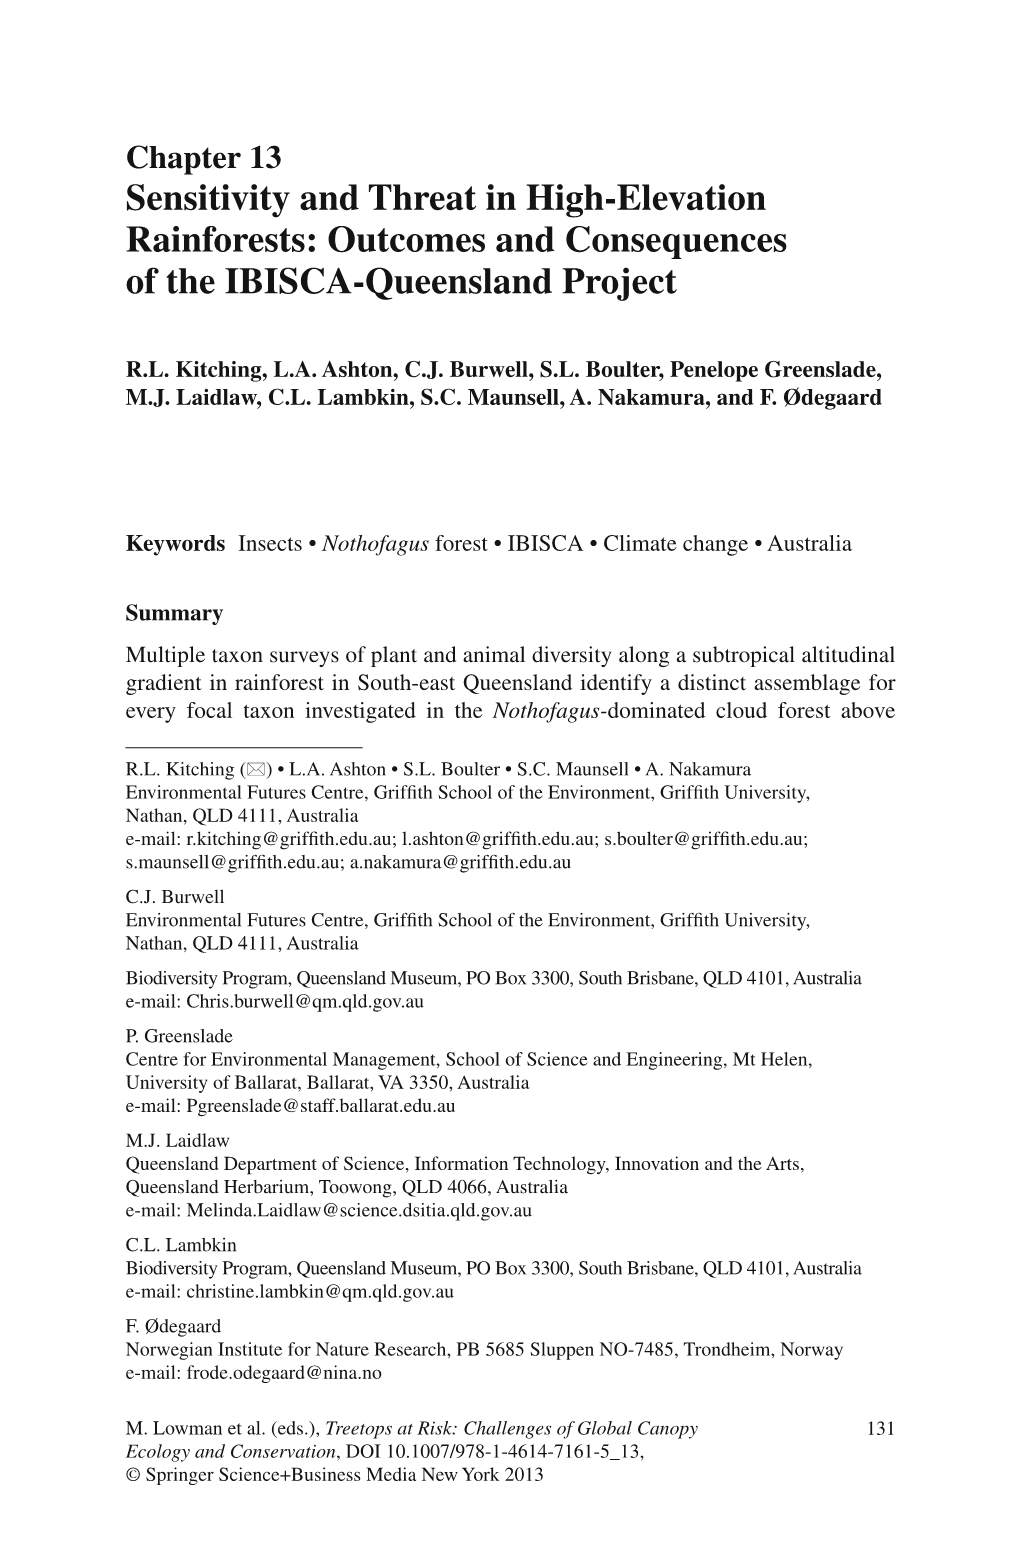 Sensitivity and Threat in High-Elevation Rainforests: Outcomes and Consequences of the IBISCA-Queensland Project